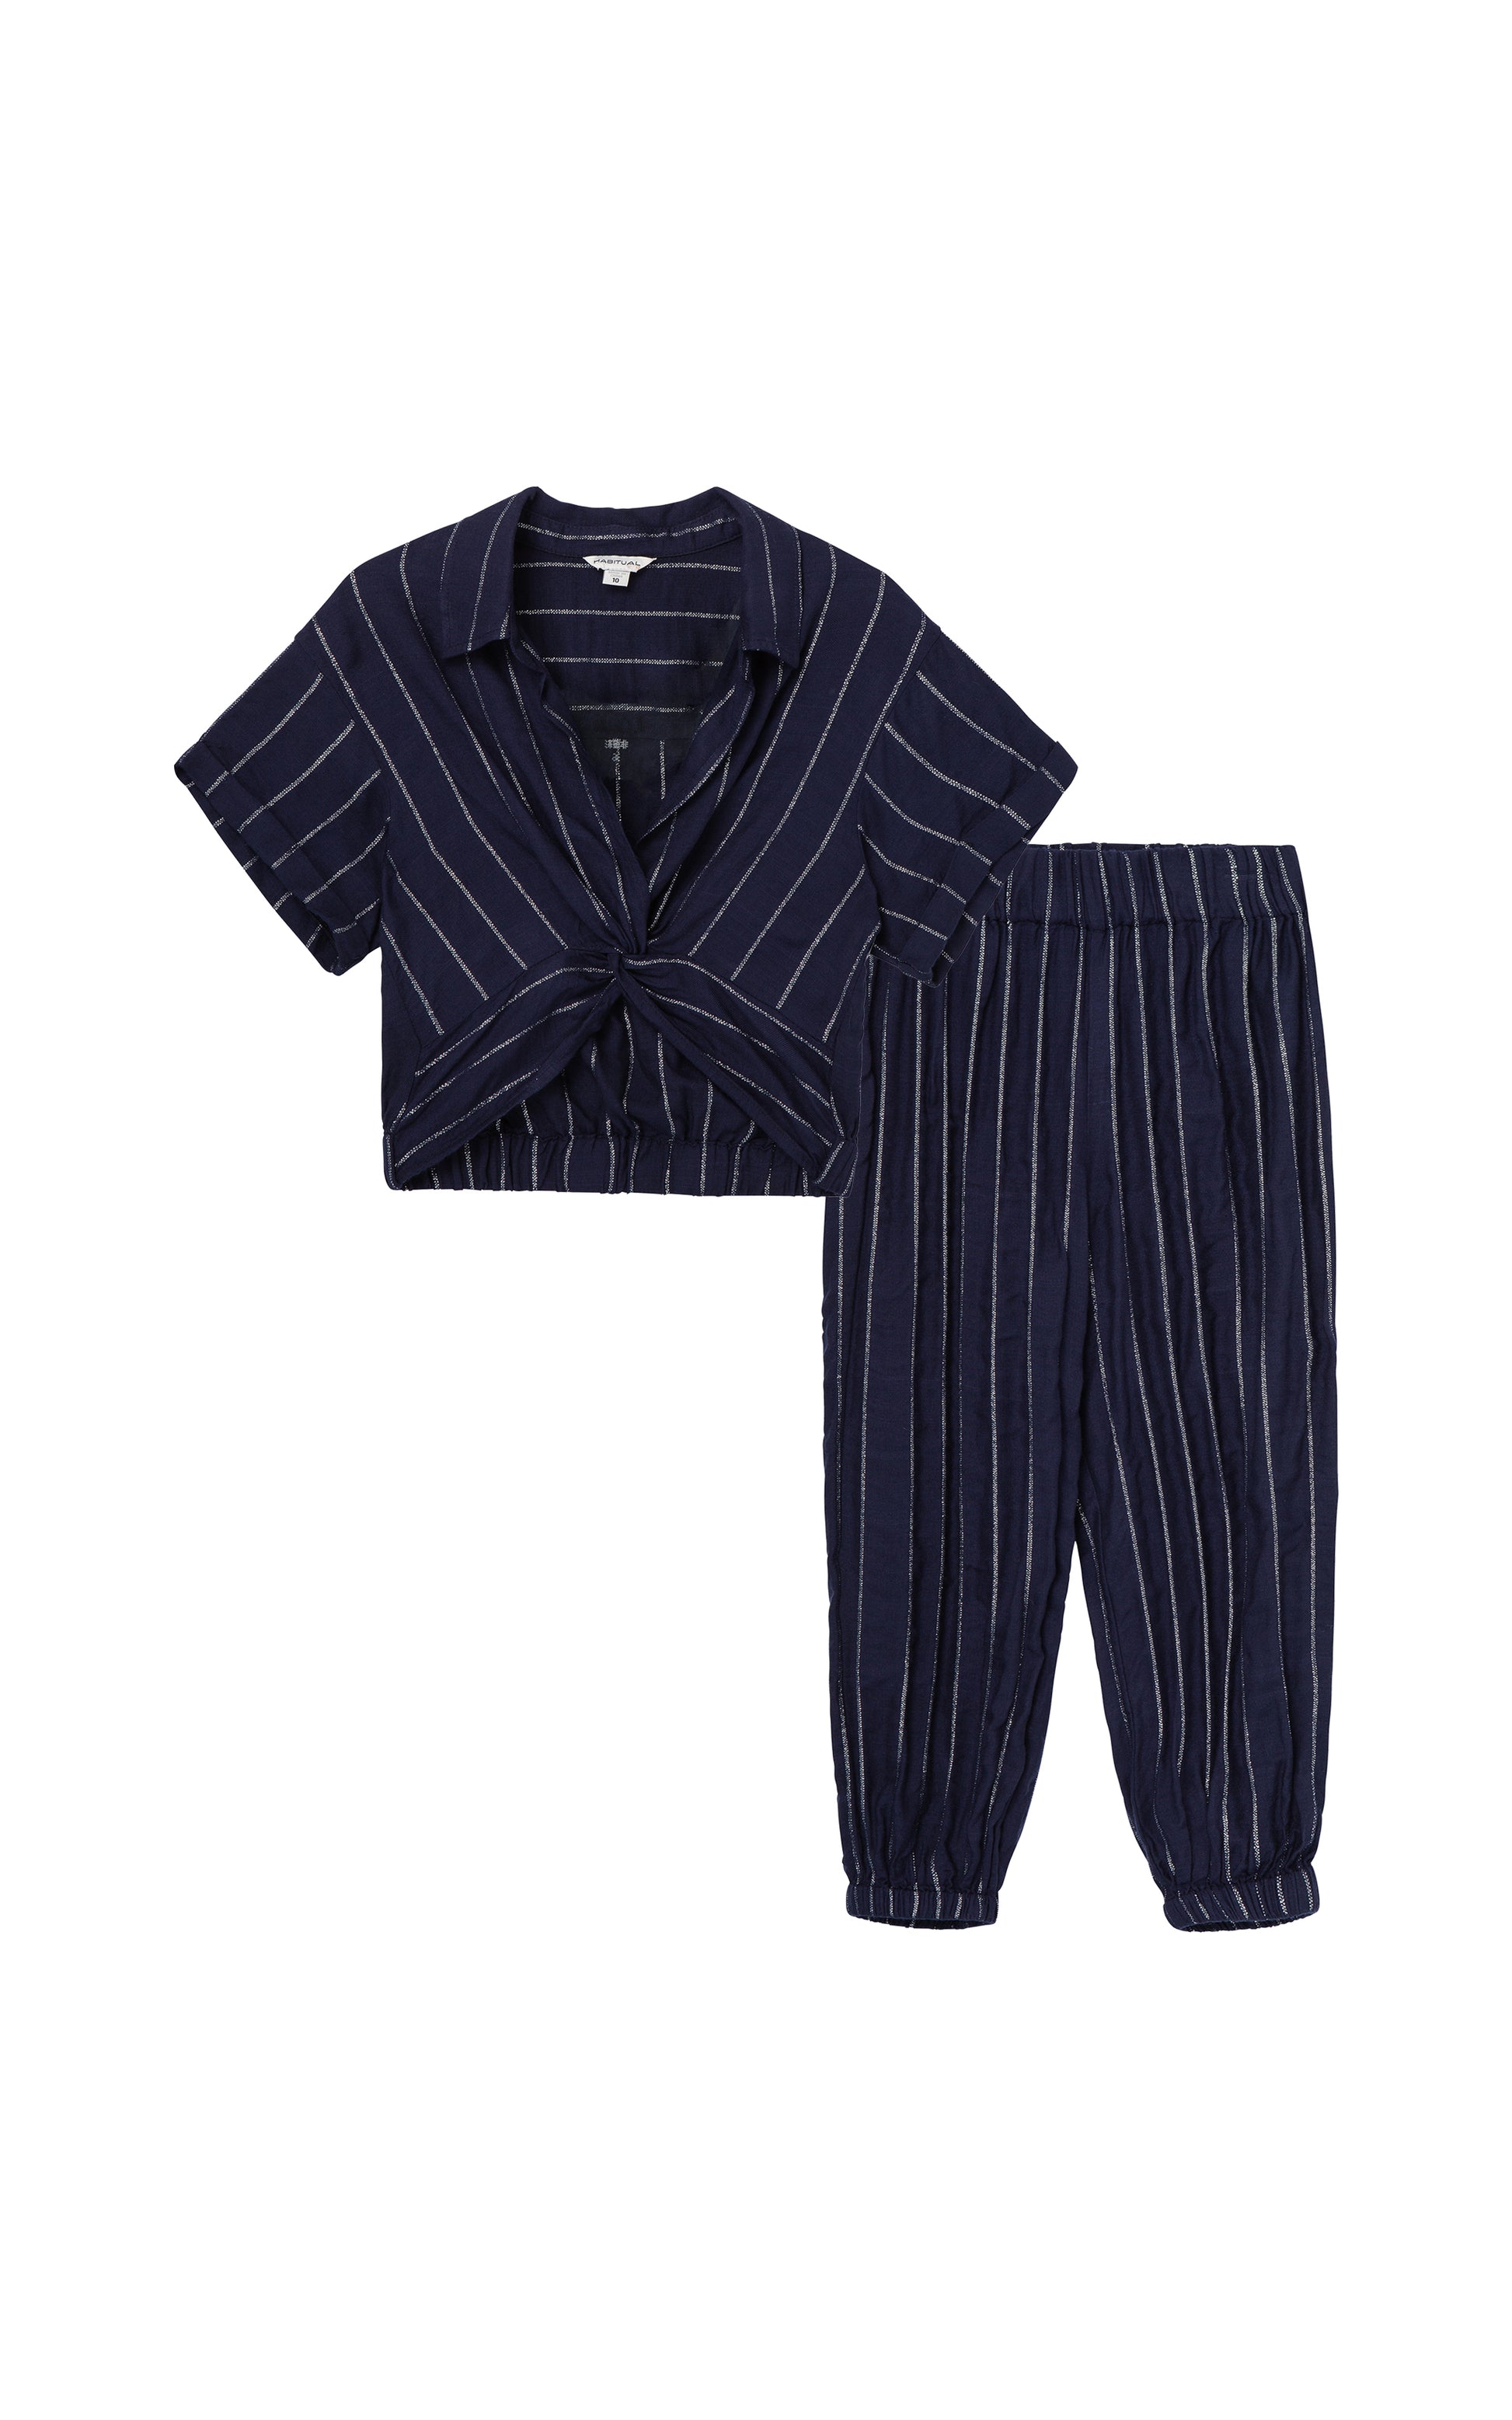 Navy blouse and pants with white stripes, collar & twist ties